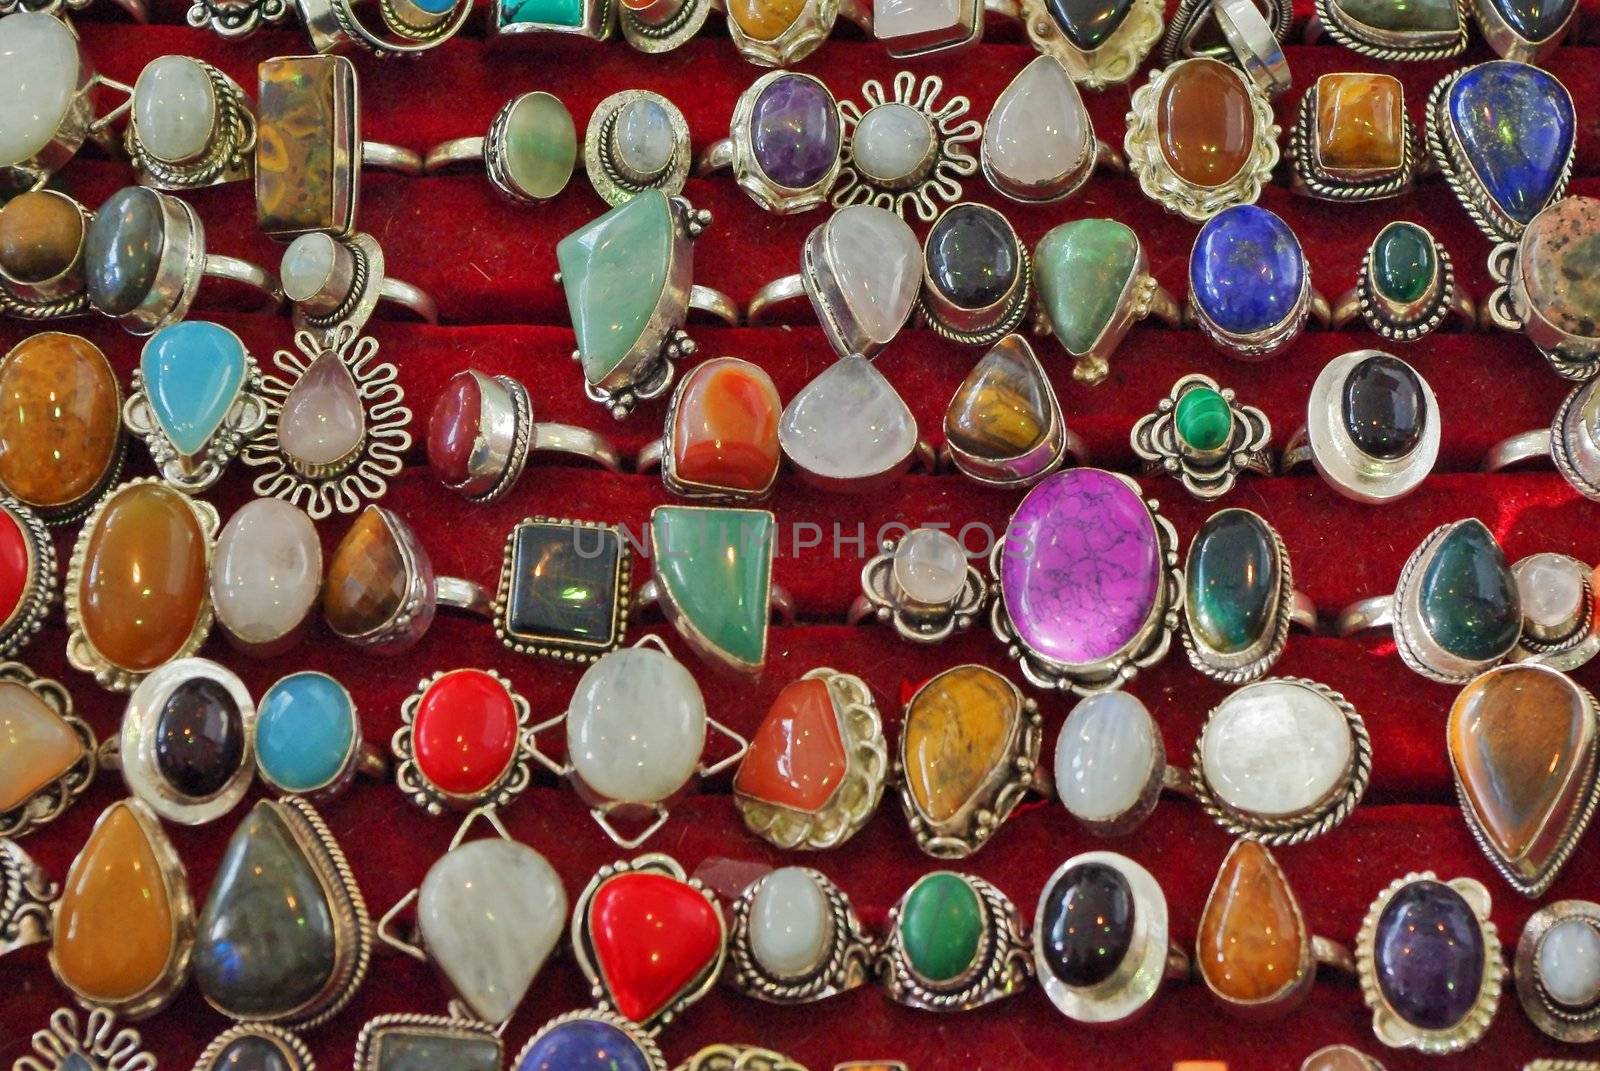 Close up image of luxury silver rings with semiprecious gems.